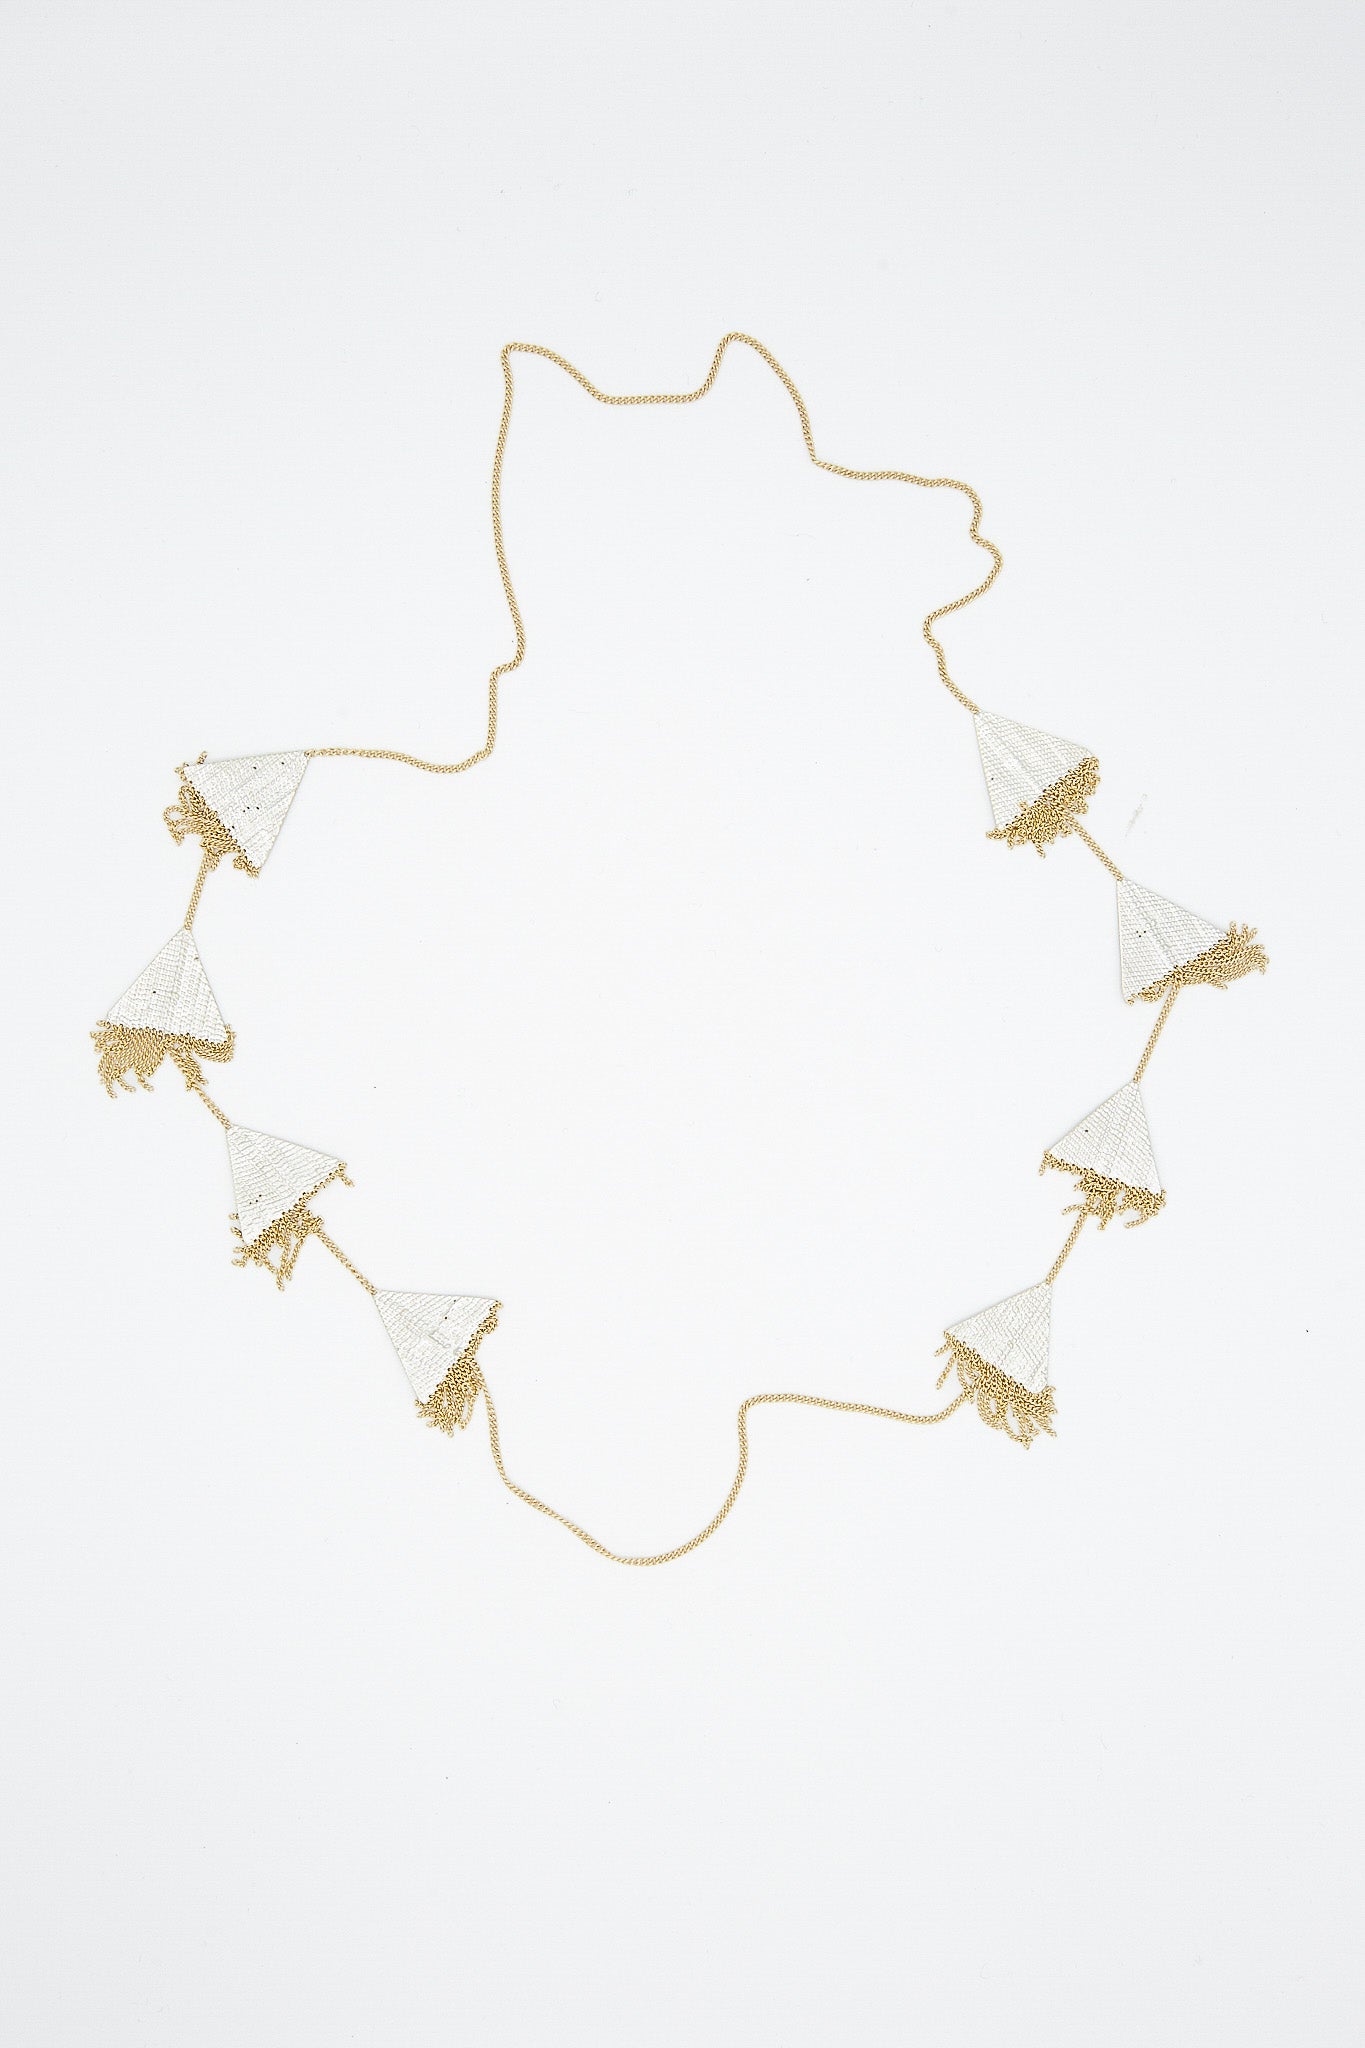 A Hannah Keefe Triangle Necklace in Brass Chain and Silver Solder with geometric forms.